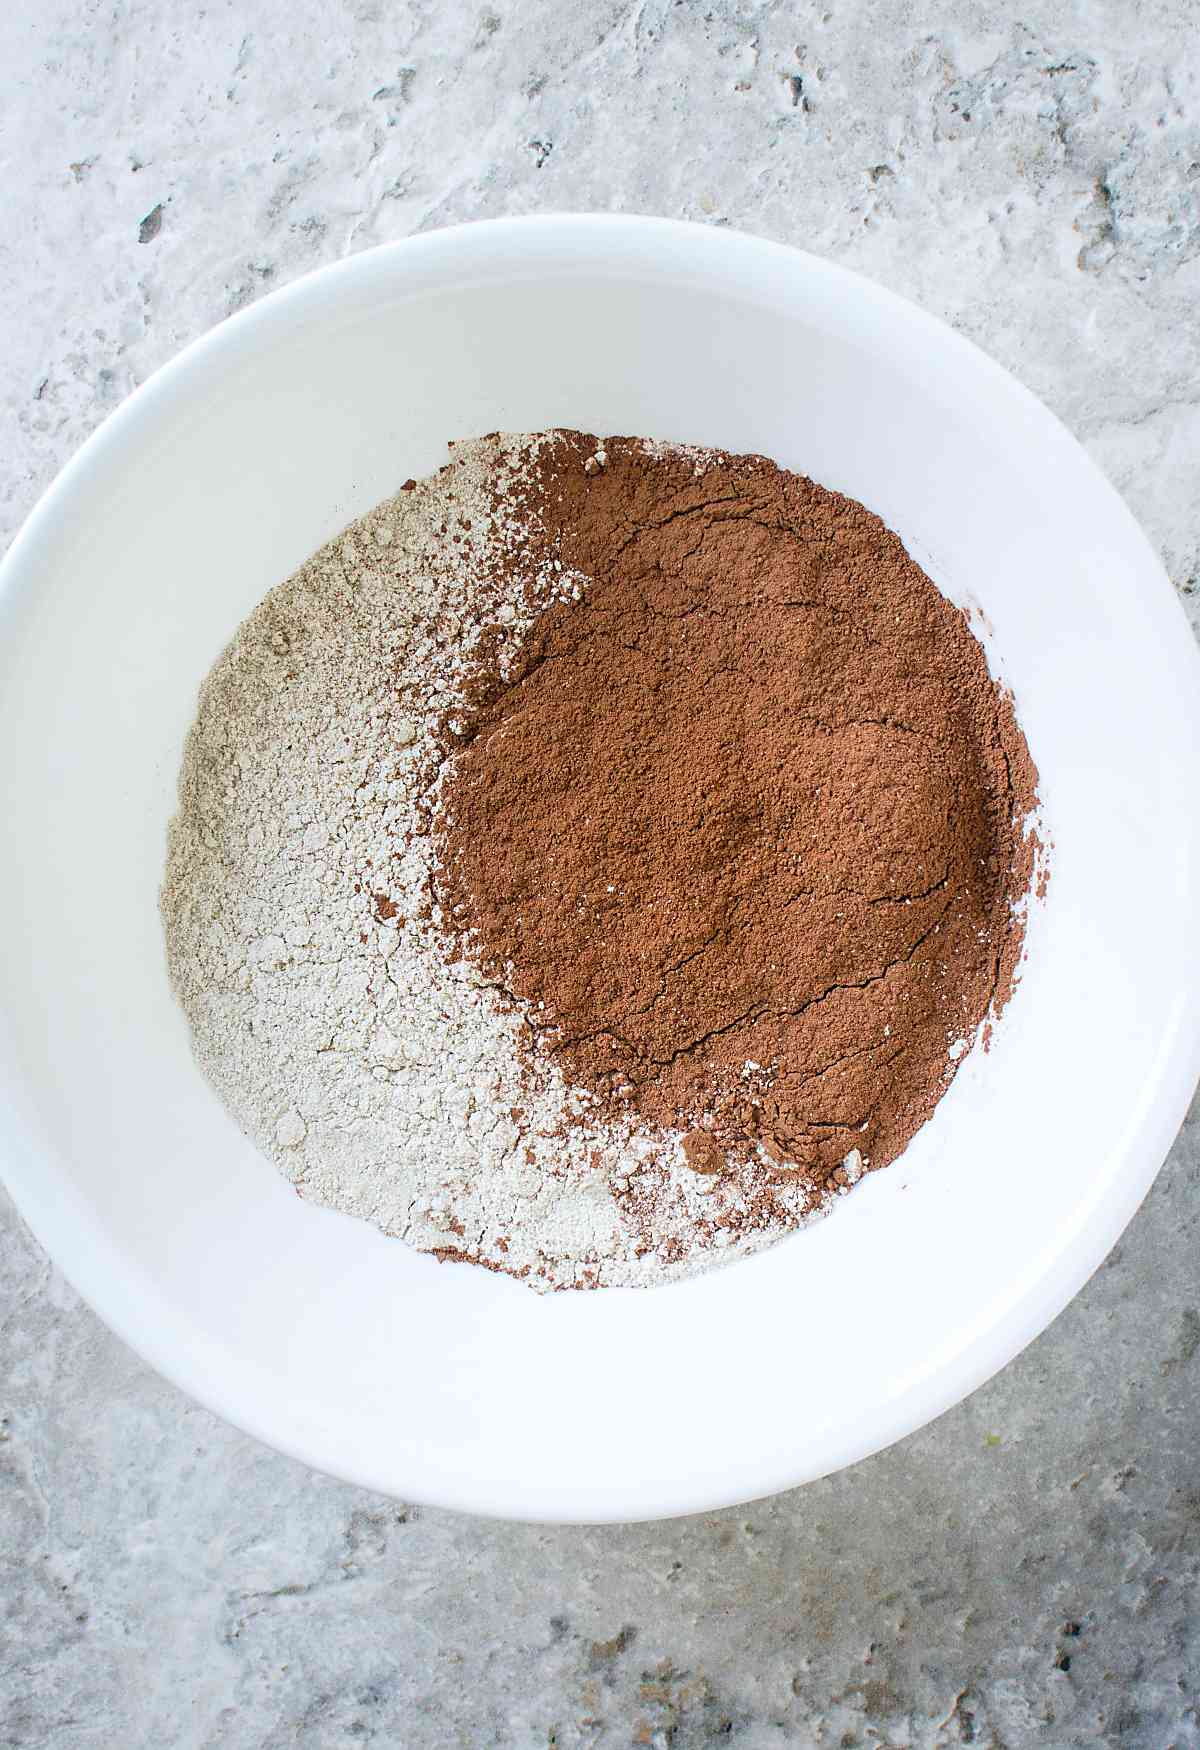 Flour and cocoa powder in a mixing bowl.